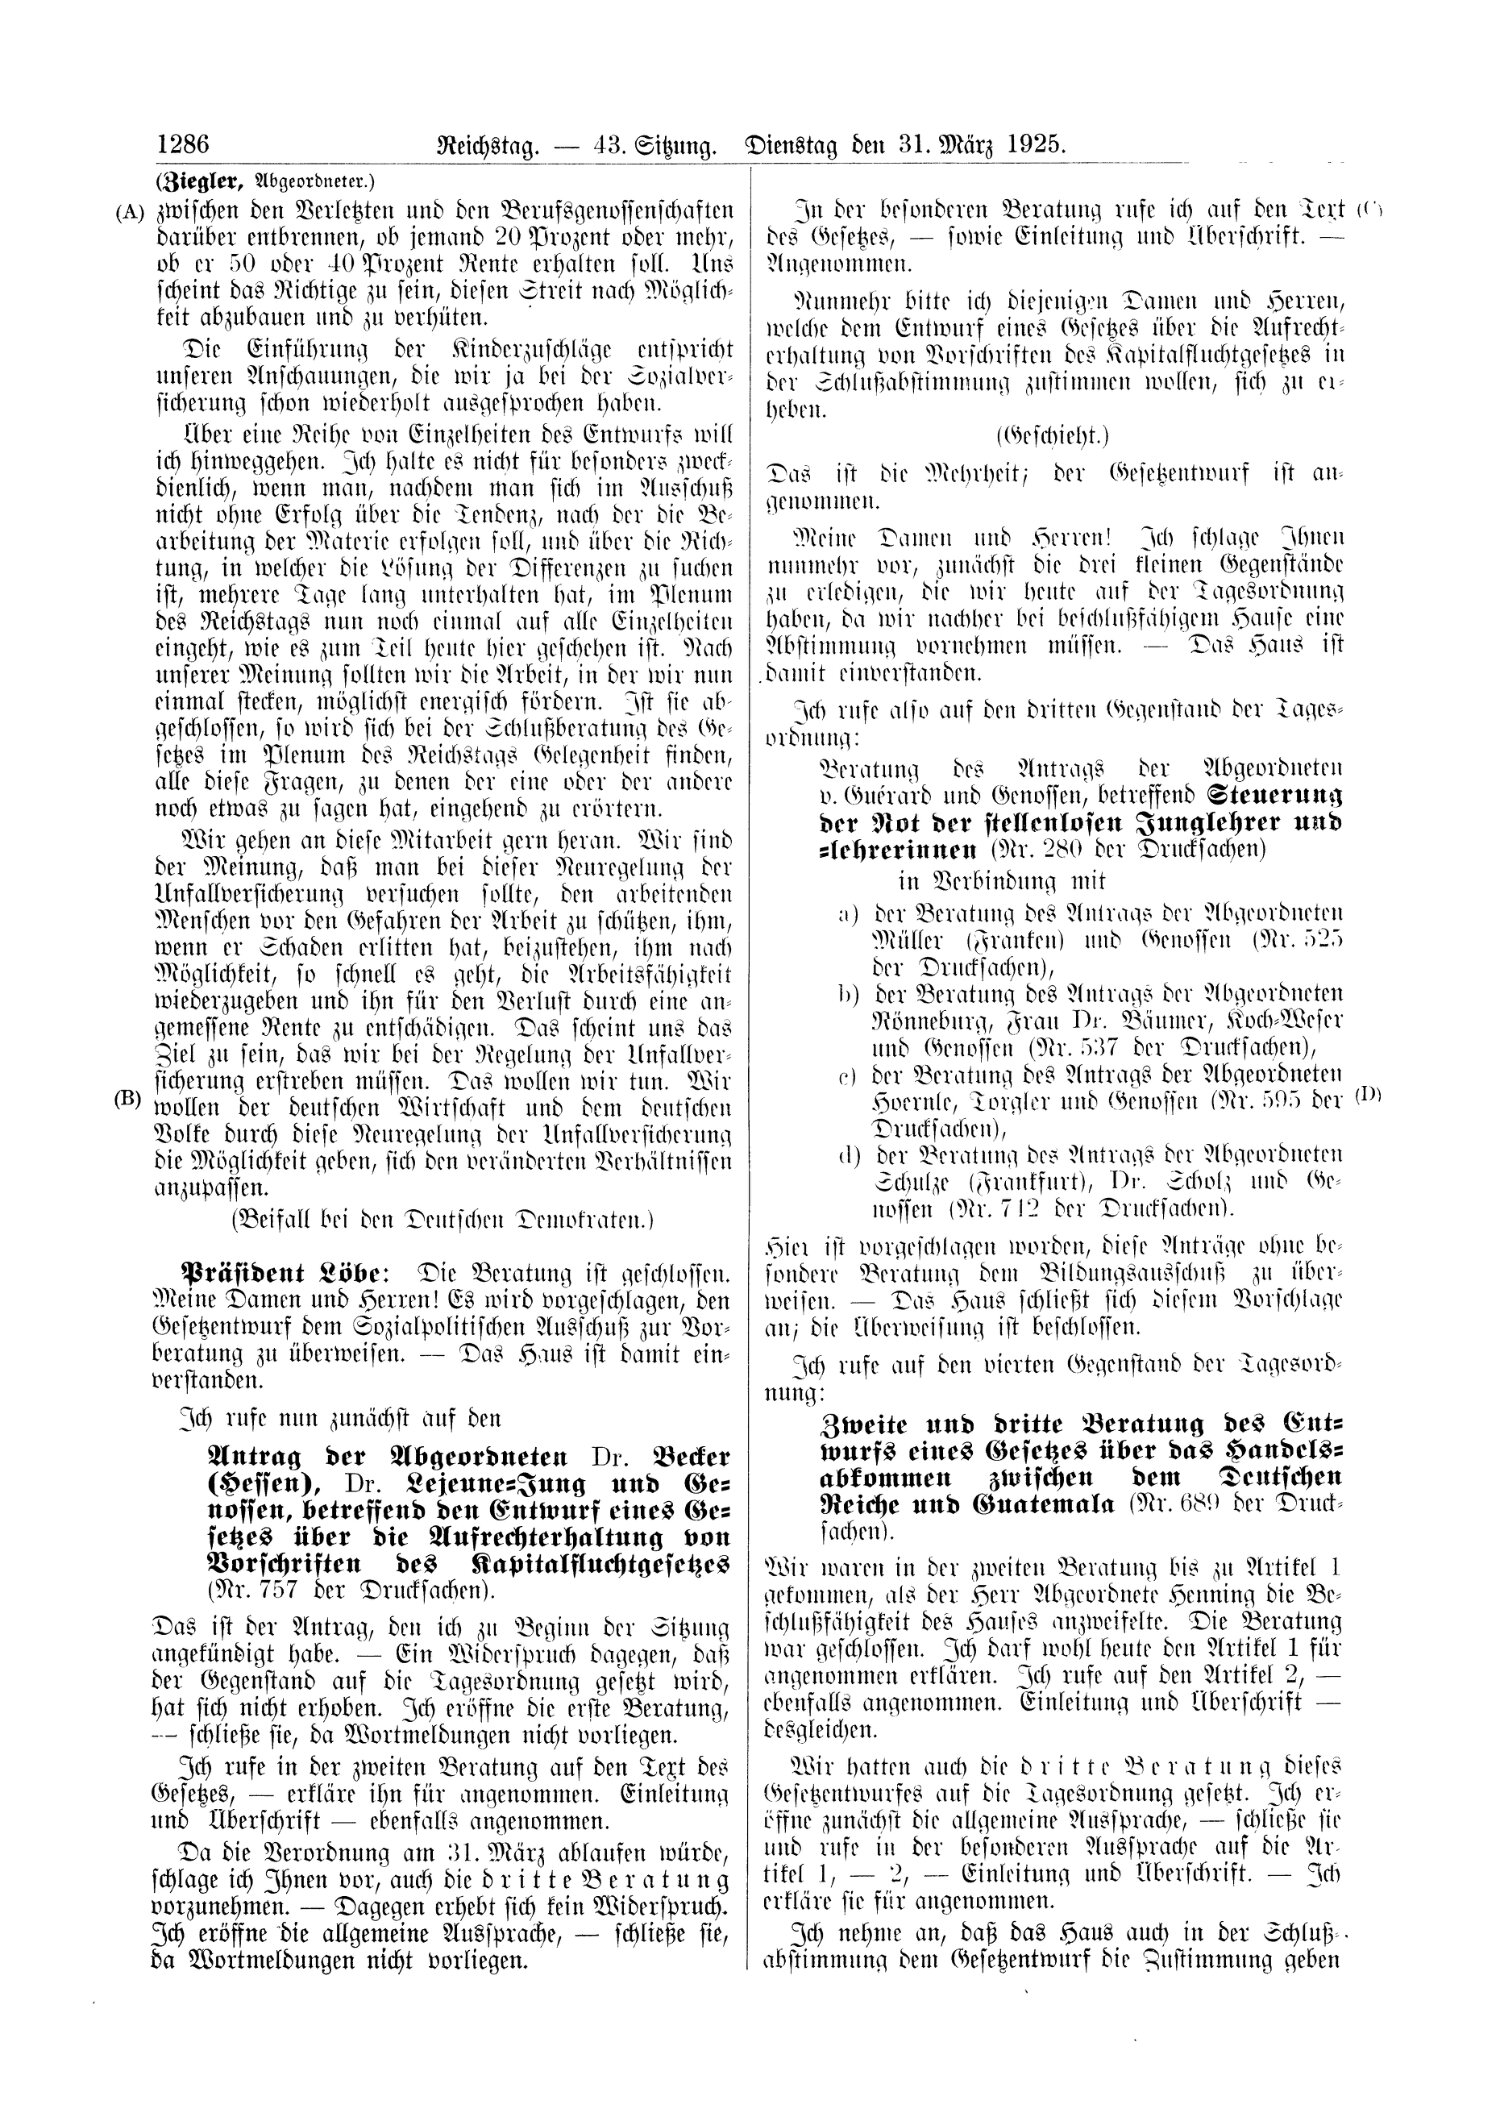 Scan of page 1286